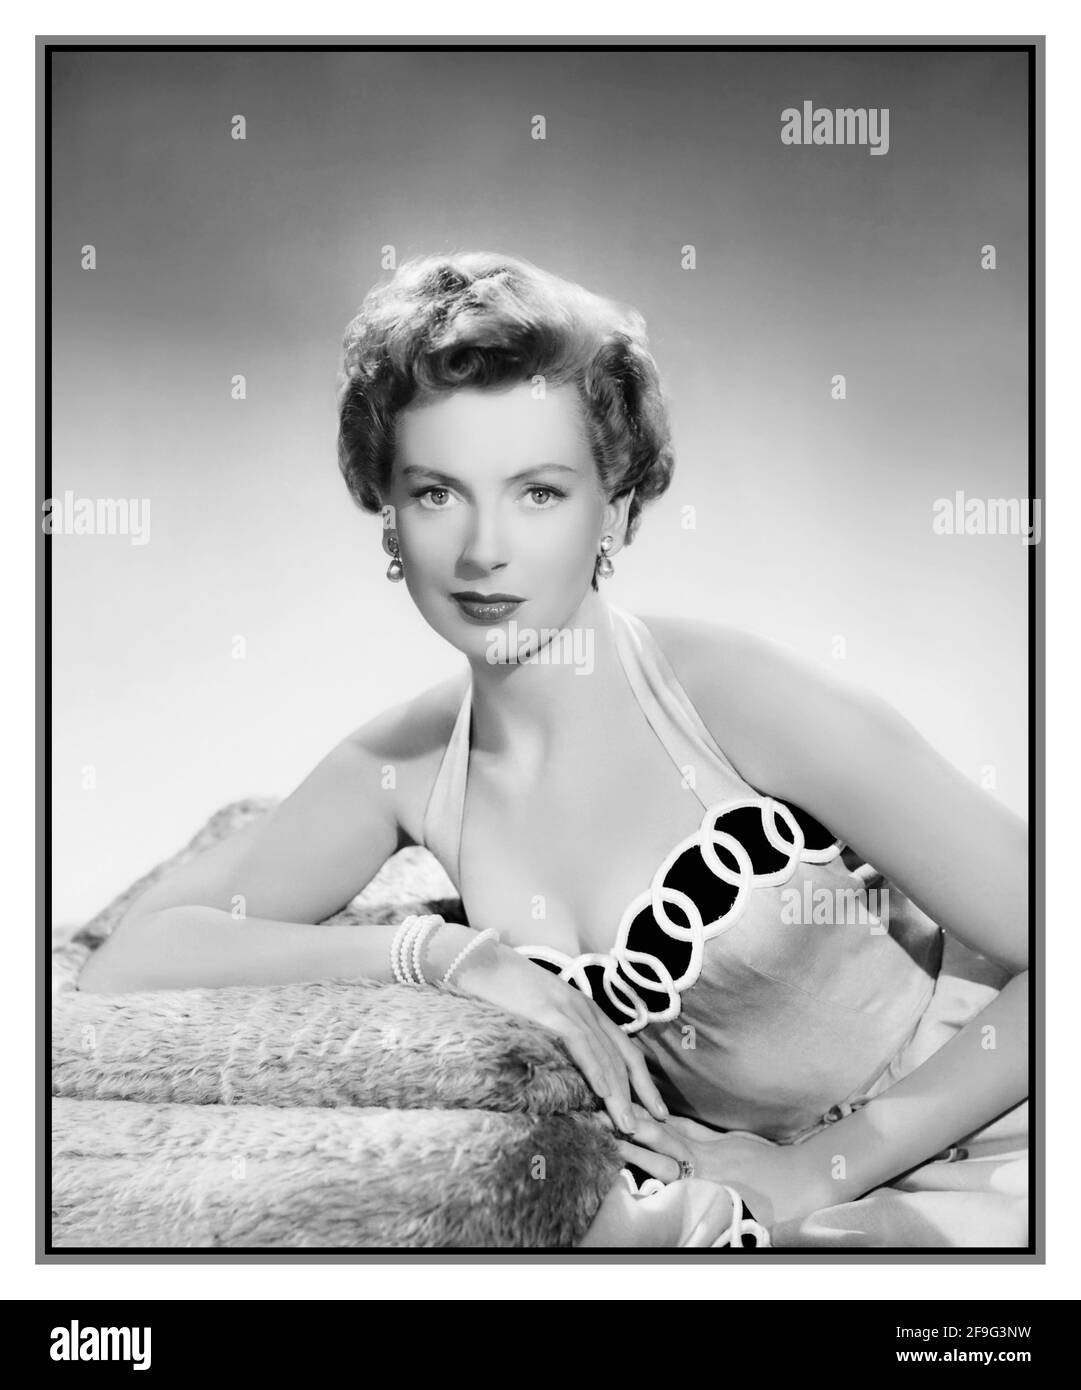 Vintage Deborah Kerr B&W Hollywood Star Studio Publicity Photo Still 1950 Deborah Jane Trimmer CBE, known professionally as Deborah Kerr, was a British film, theatre, and television actress. She was nominated six times for the Academy Award for Best Actress, and holds the record for an actress most nominated in the lead actress category without winning. Stock Photo